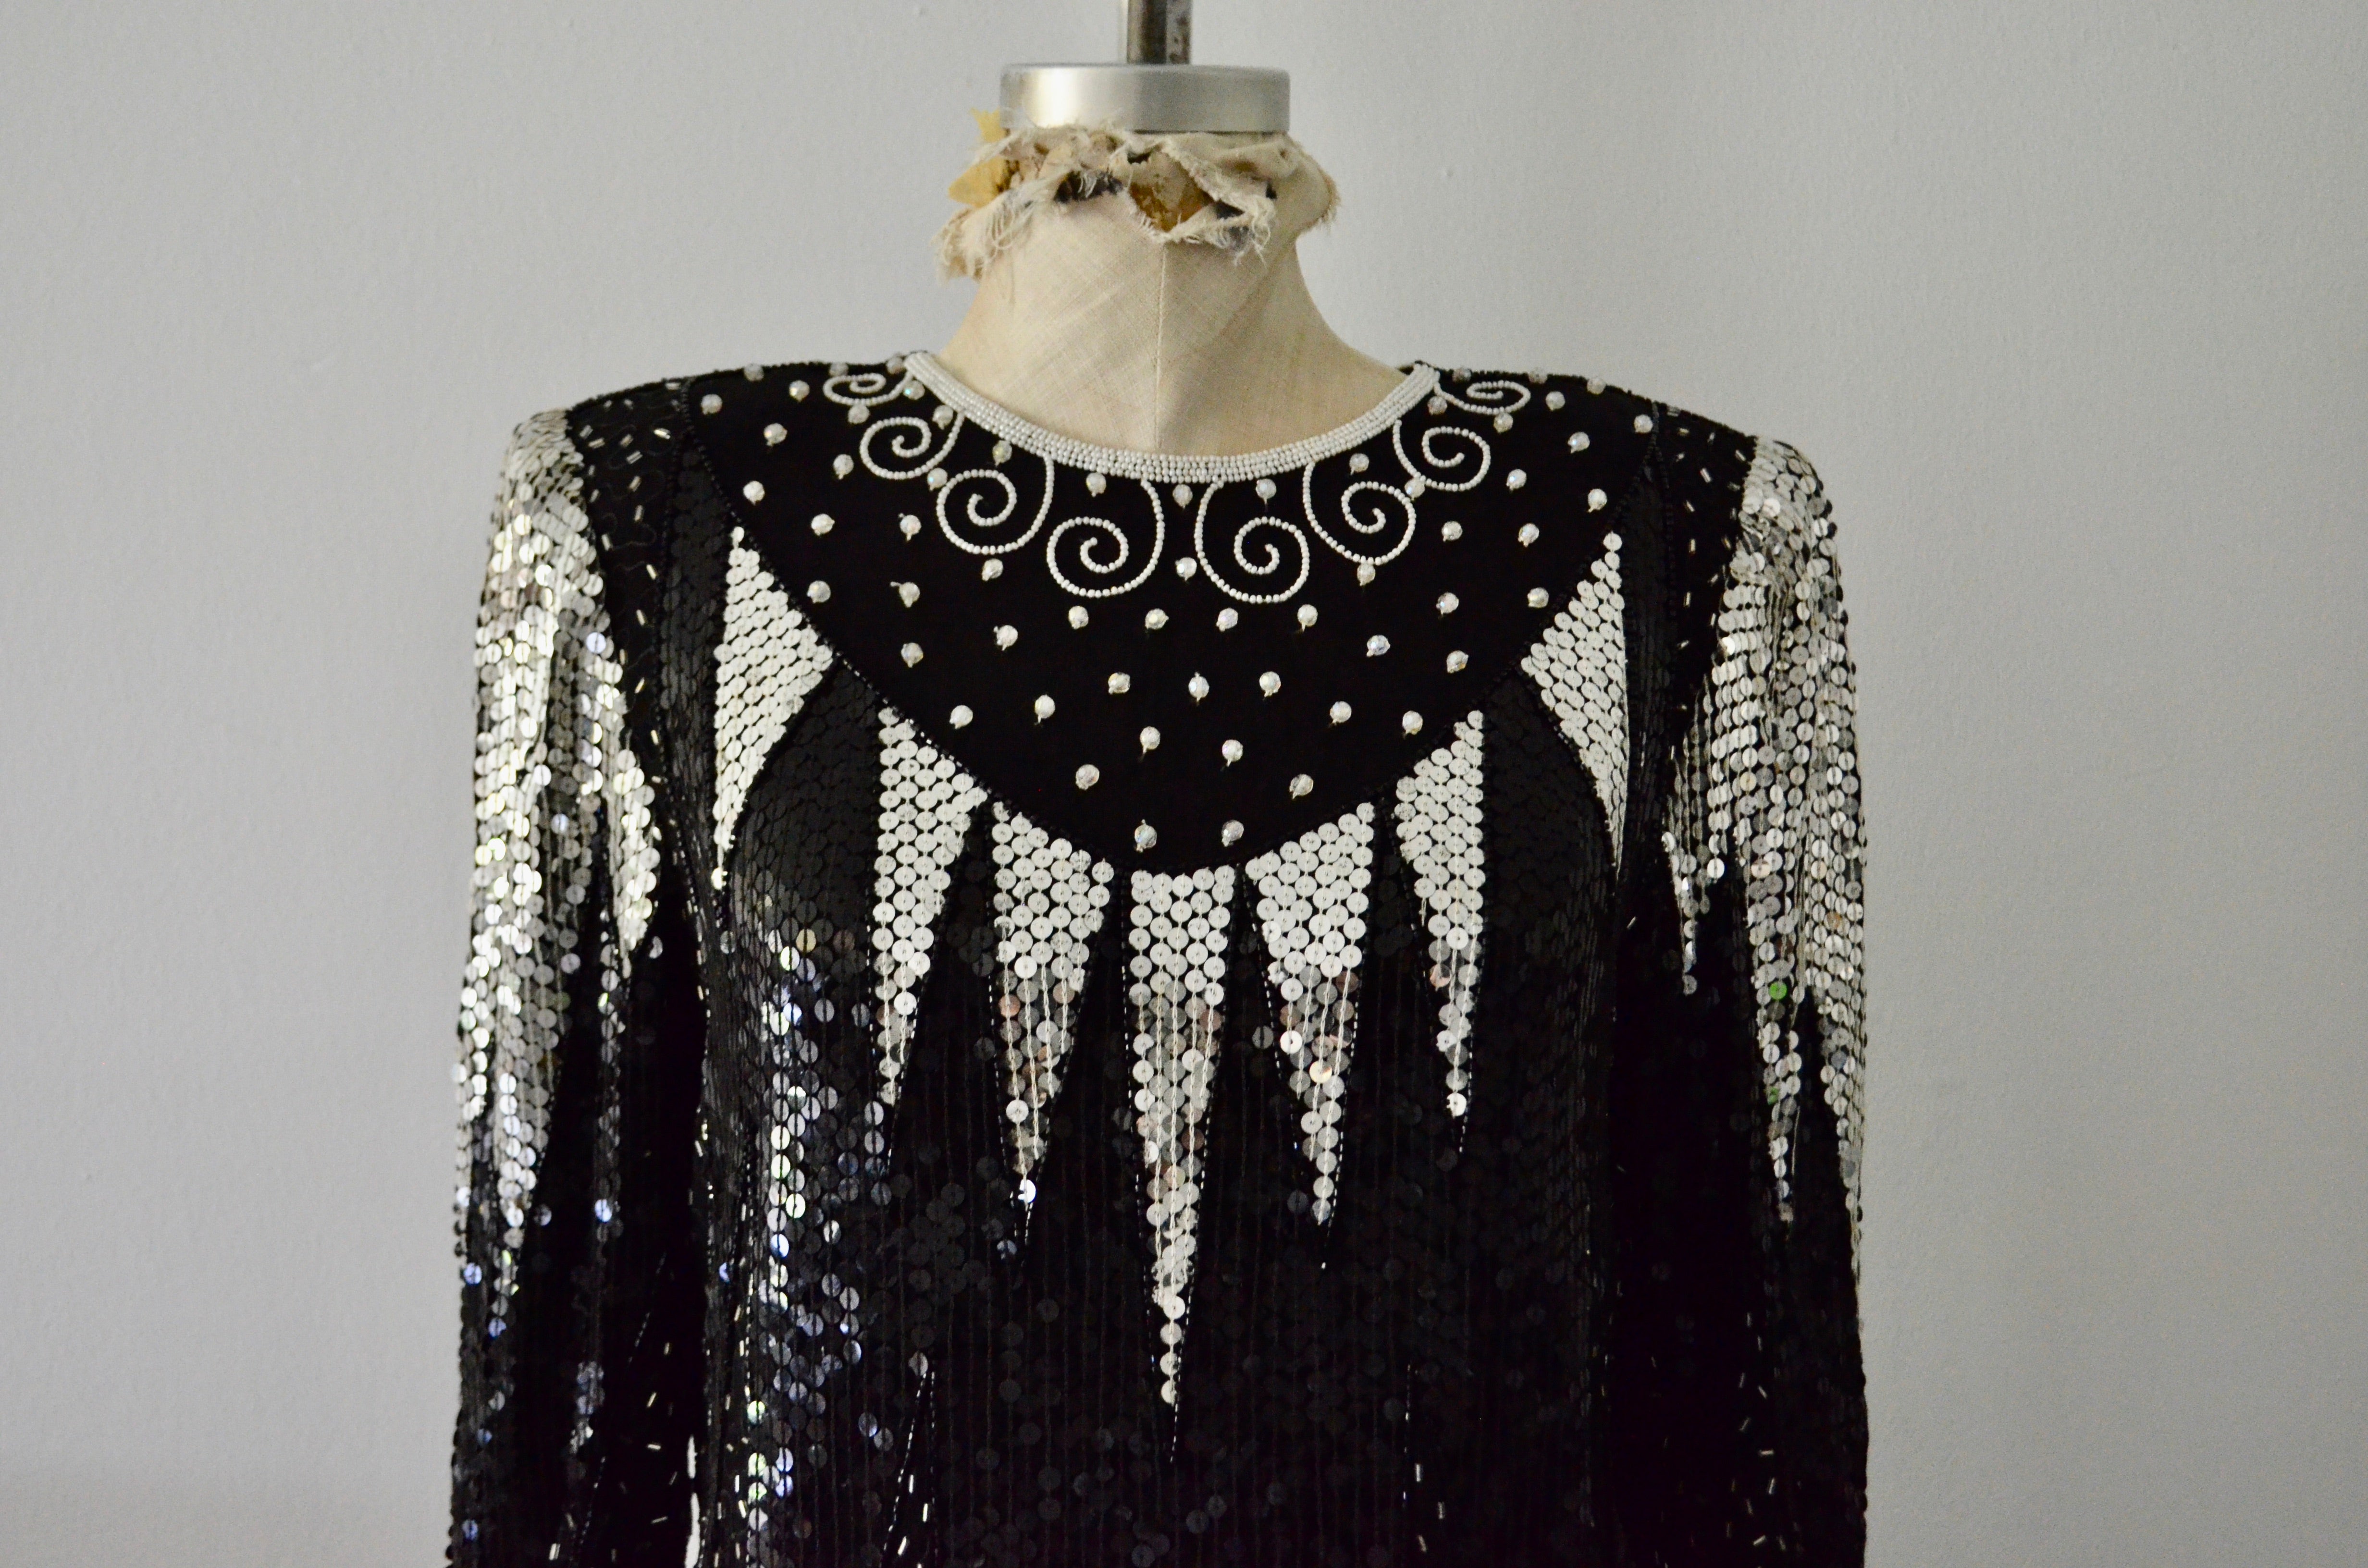 Saks Fifth Avenue Bejeweled Long Sleeve Top Dress Sequined Beaded Edge Wave Geometric Design Blouse 1980s Fashion